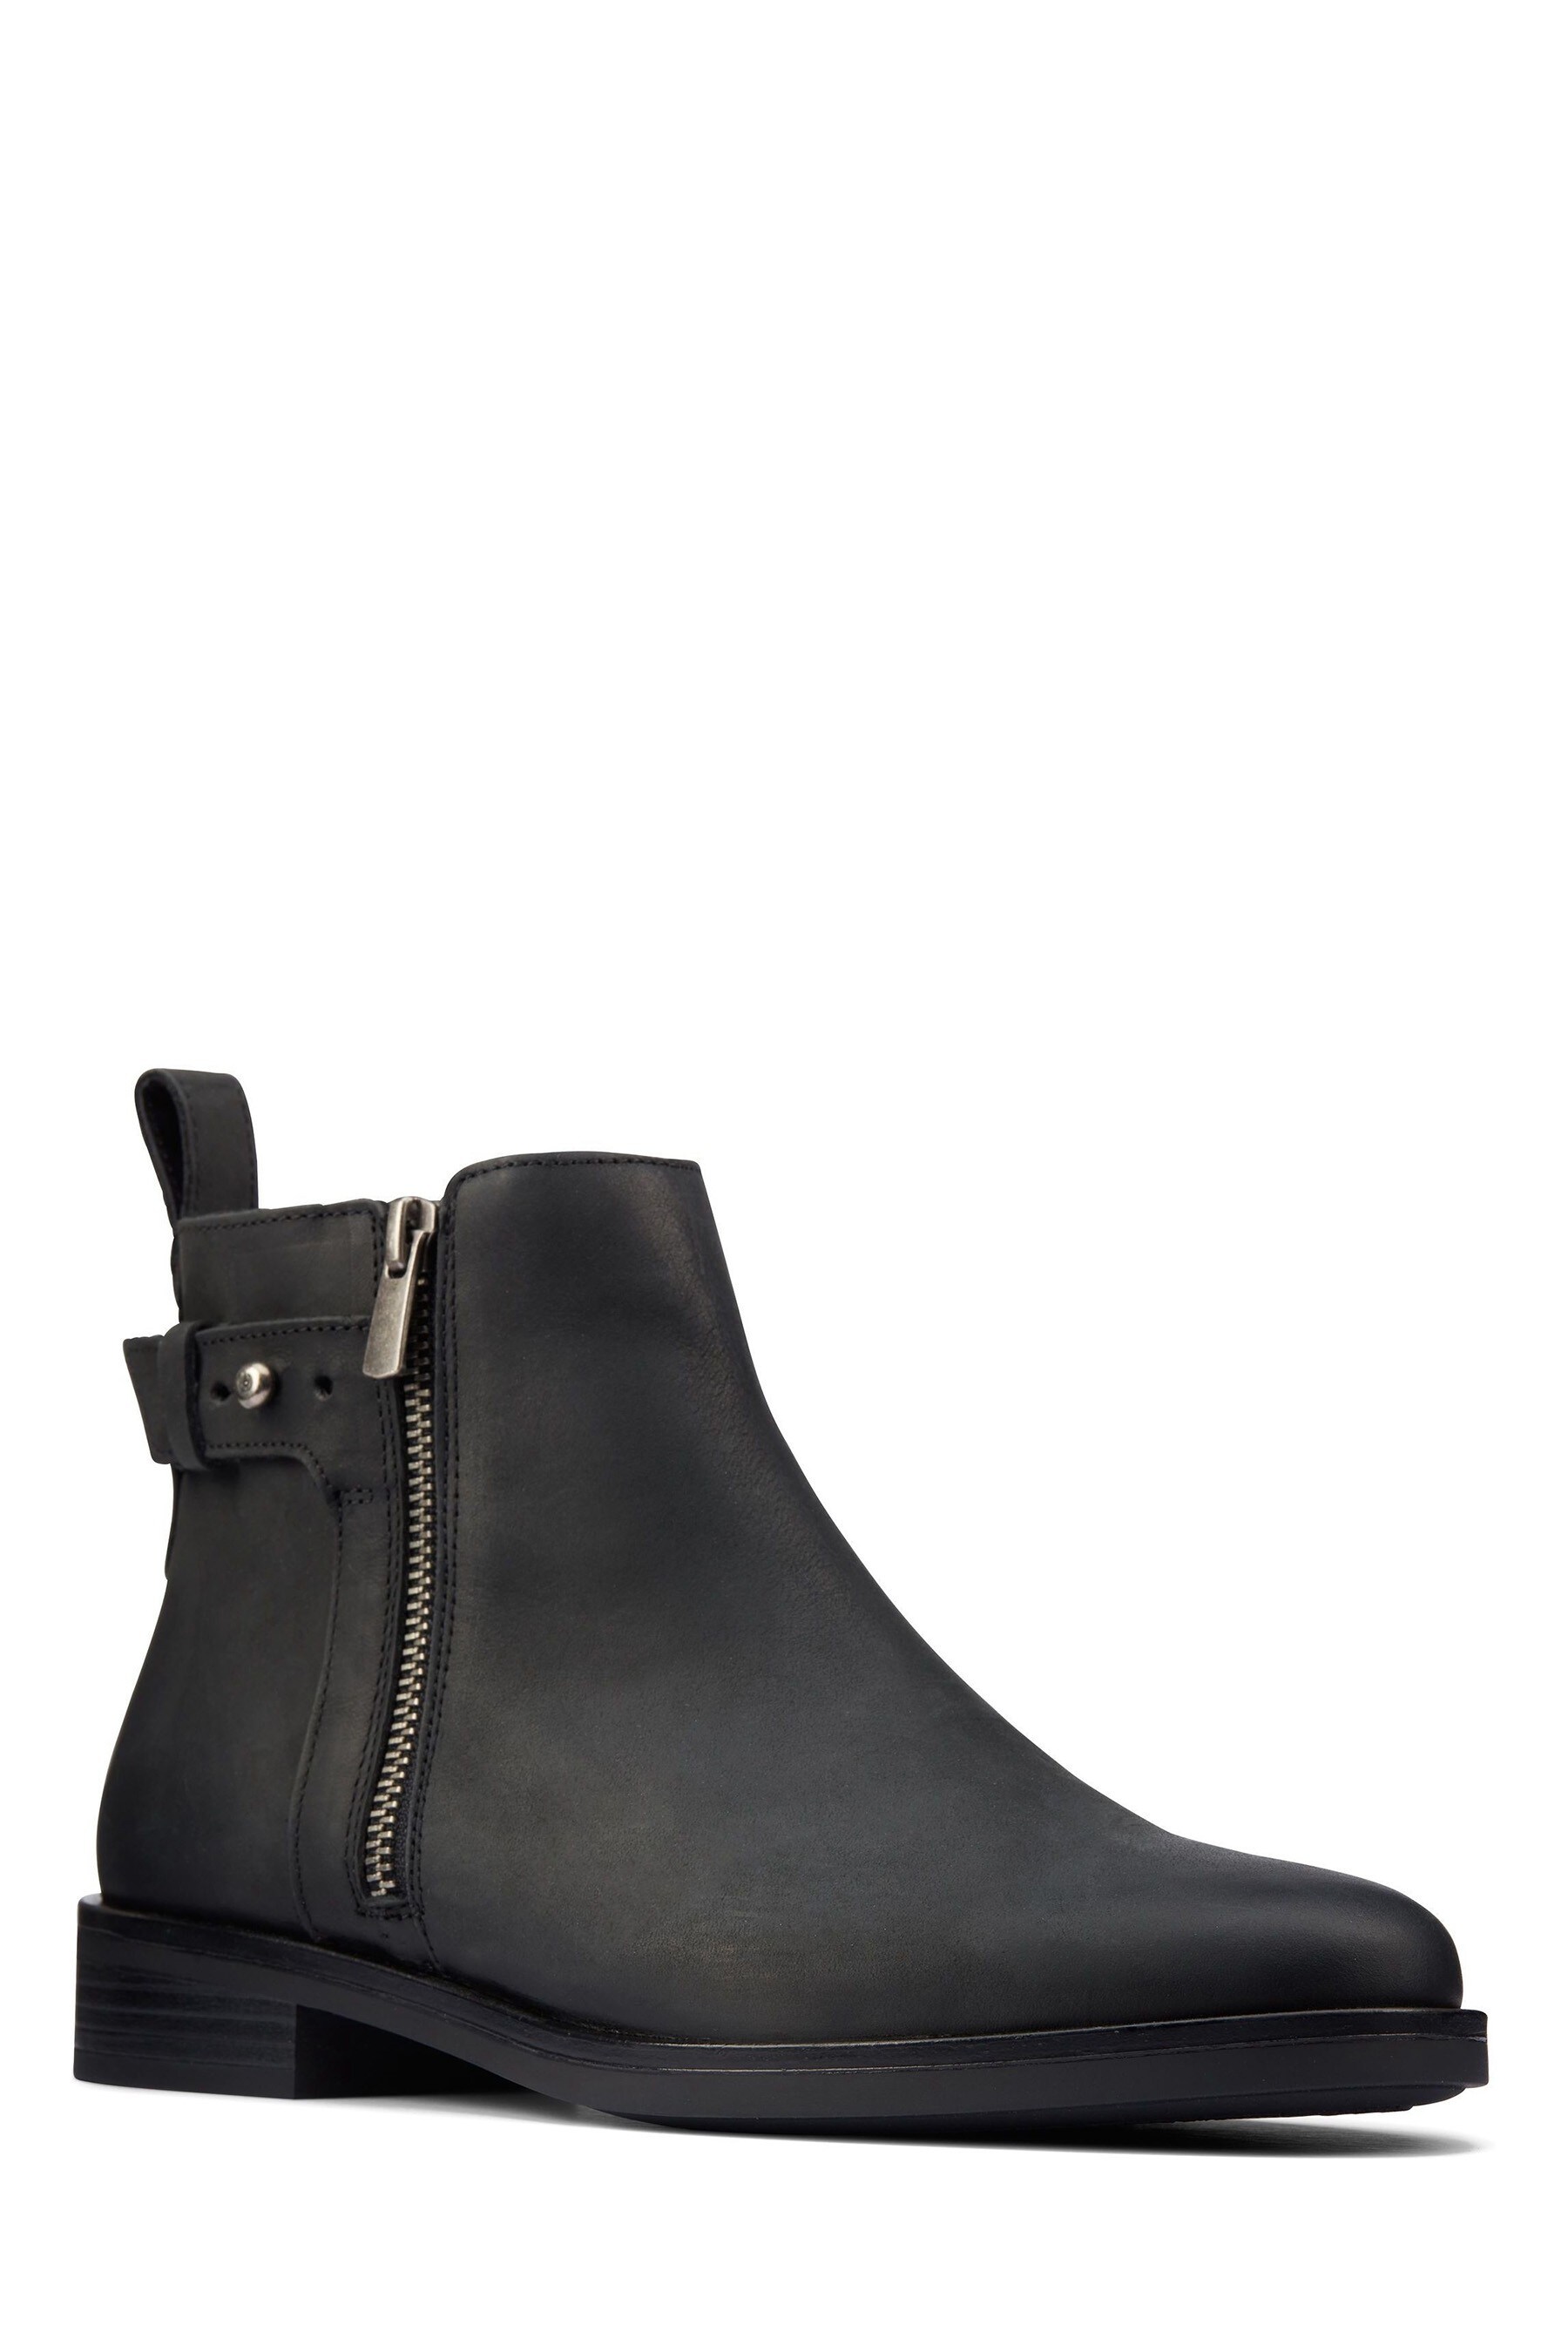 Buy Clarks Black Wide Fit Leather Memi Lo Boots from Next Germany